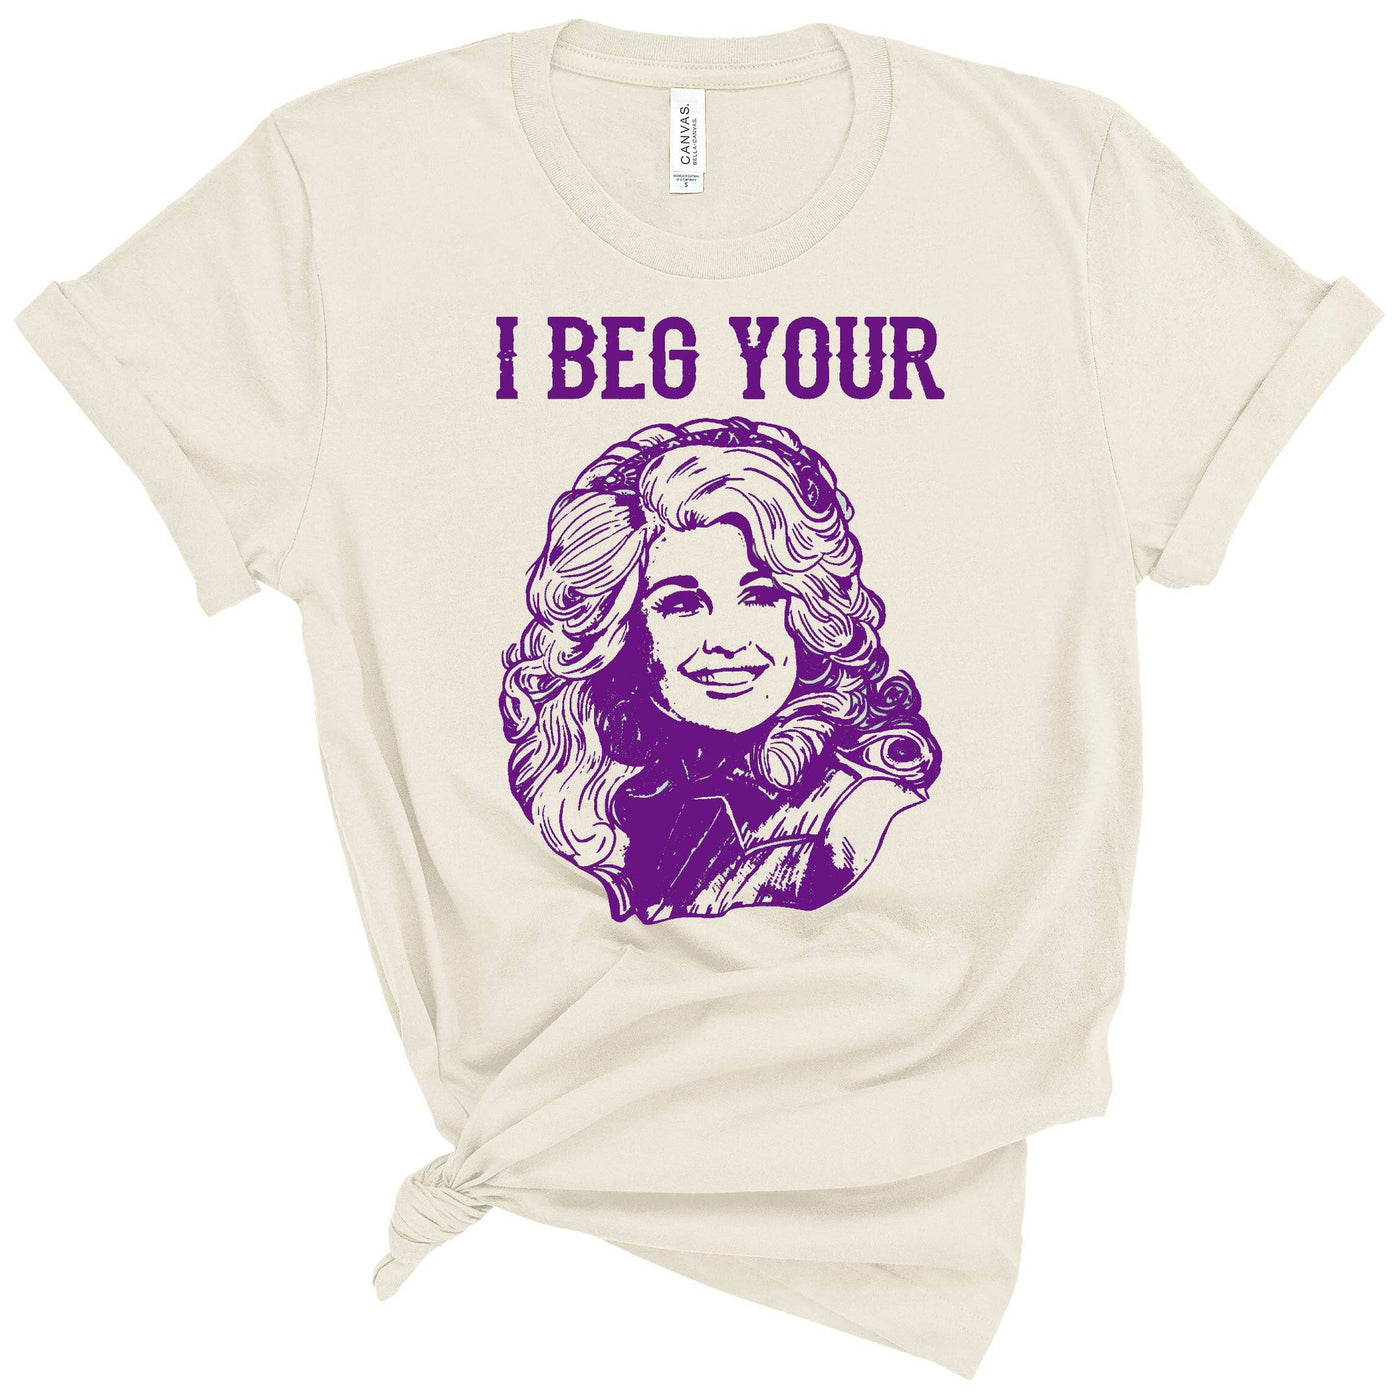 I BEG YOUR PARTON T-SHIRT-Small